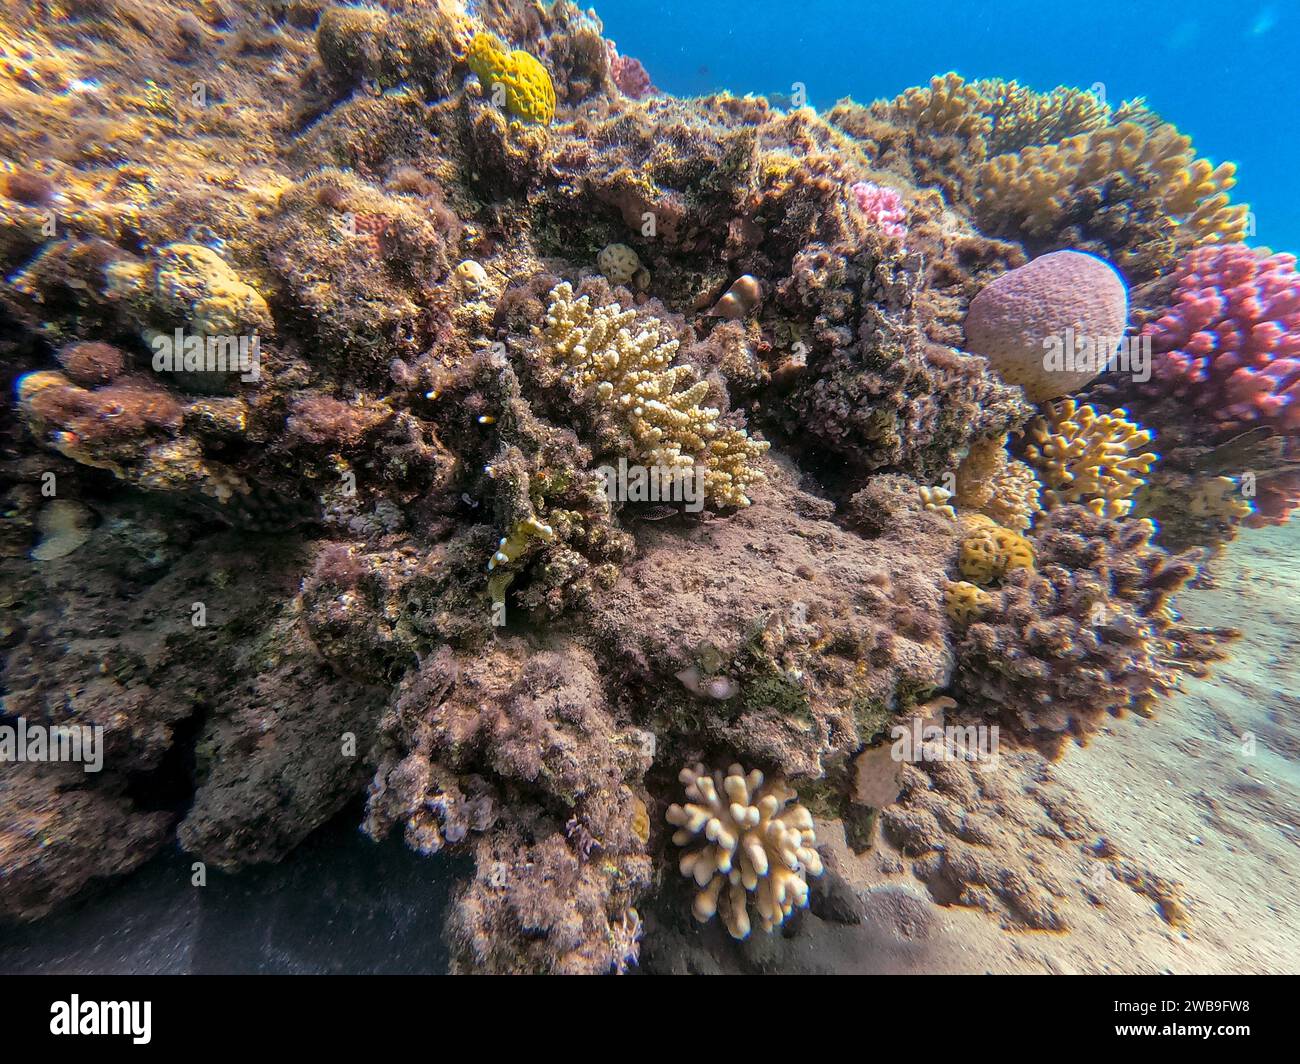 Underwater panoramic view of coral reef with tropical fish, seaweeds ...